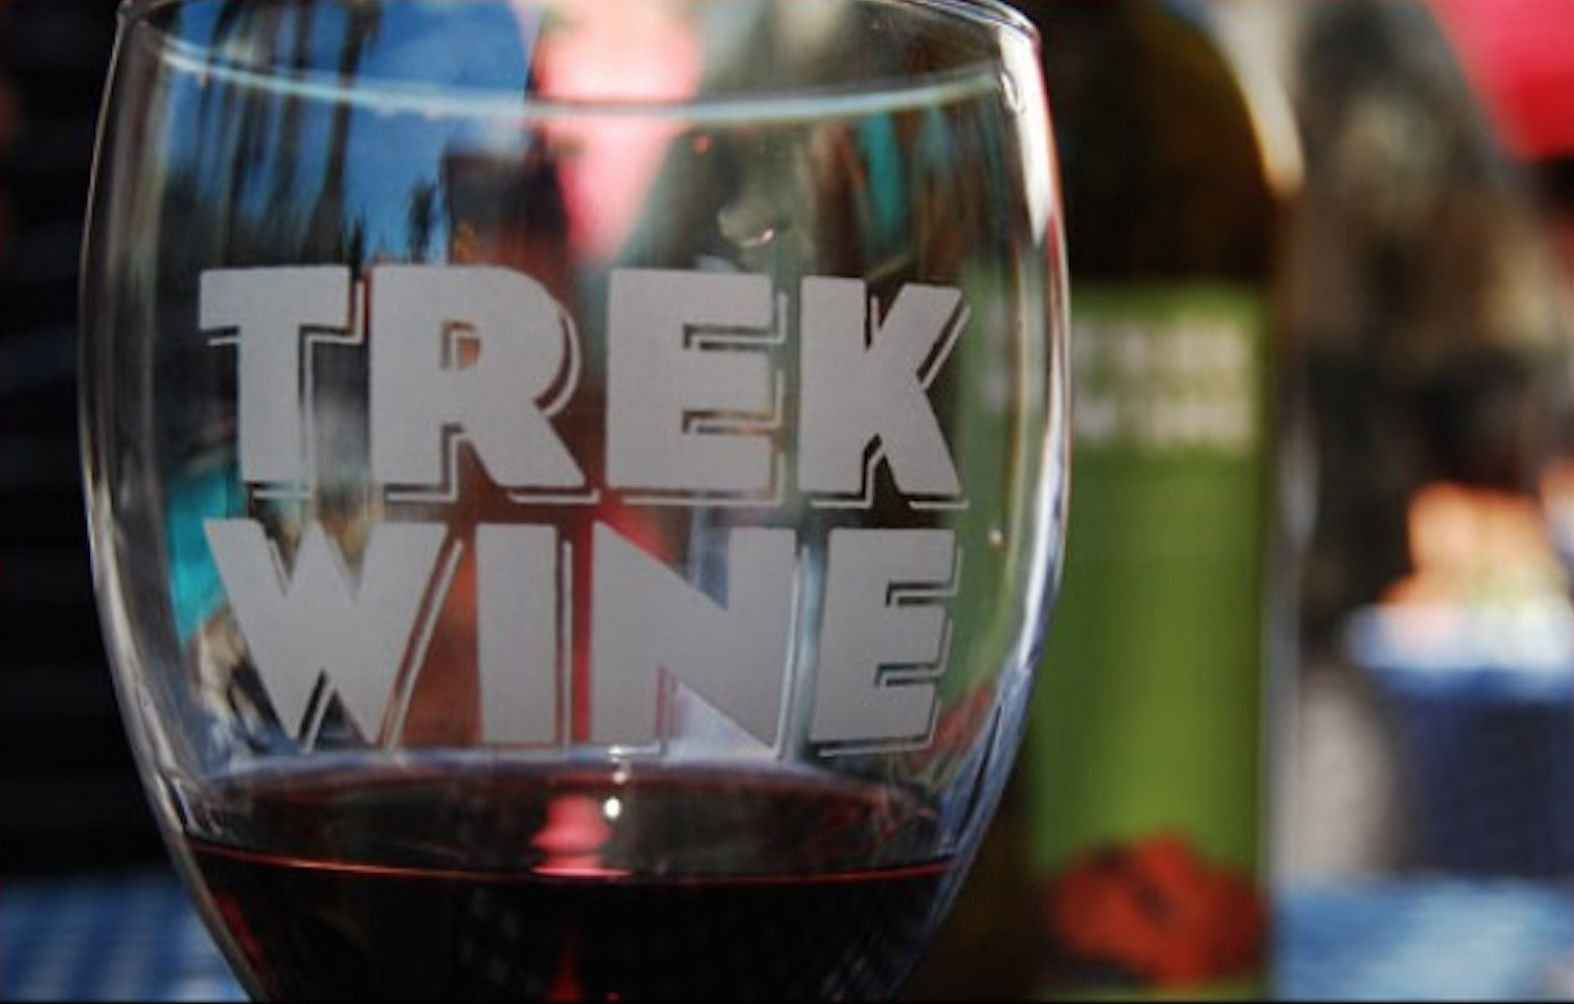 Trek Wine glass filled with red wine in Novato